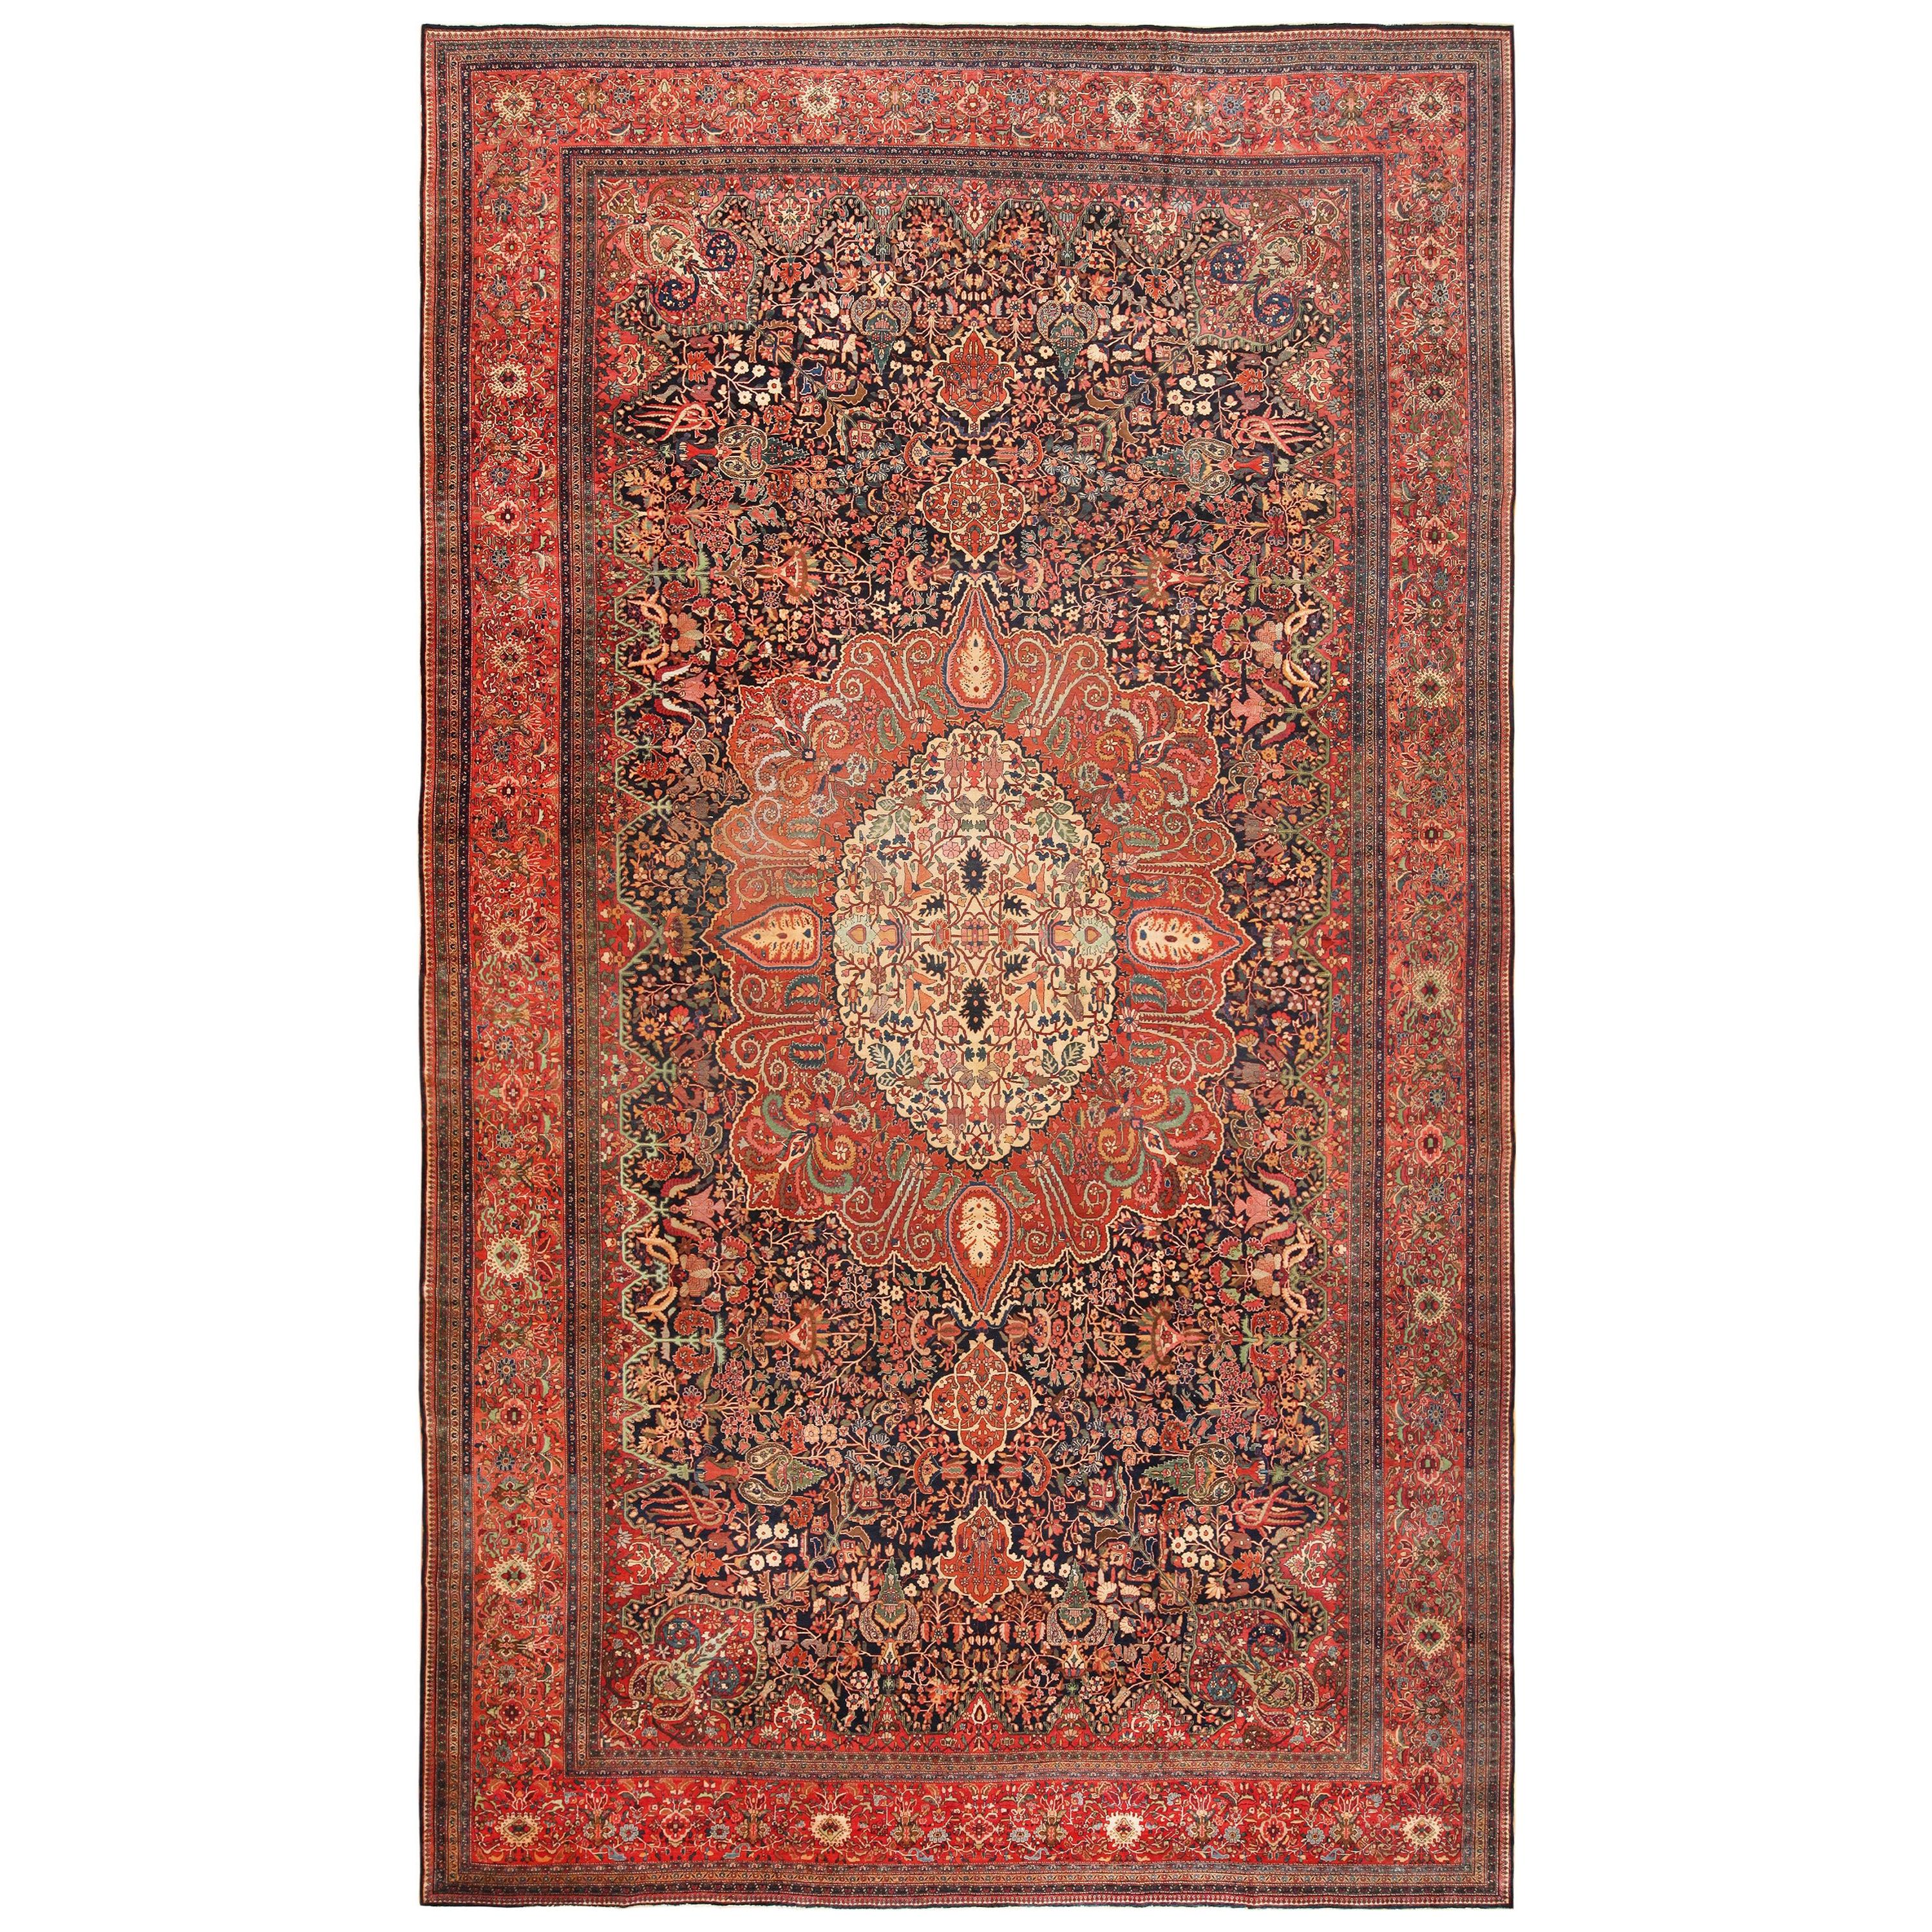 Nazmiyal Antique Persian Sarouk Farahan Rug. Size: 13 ft 4 in x 23 ft 10 in For Sale